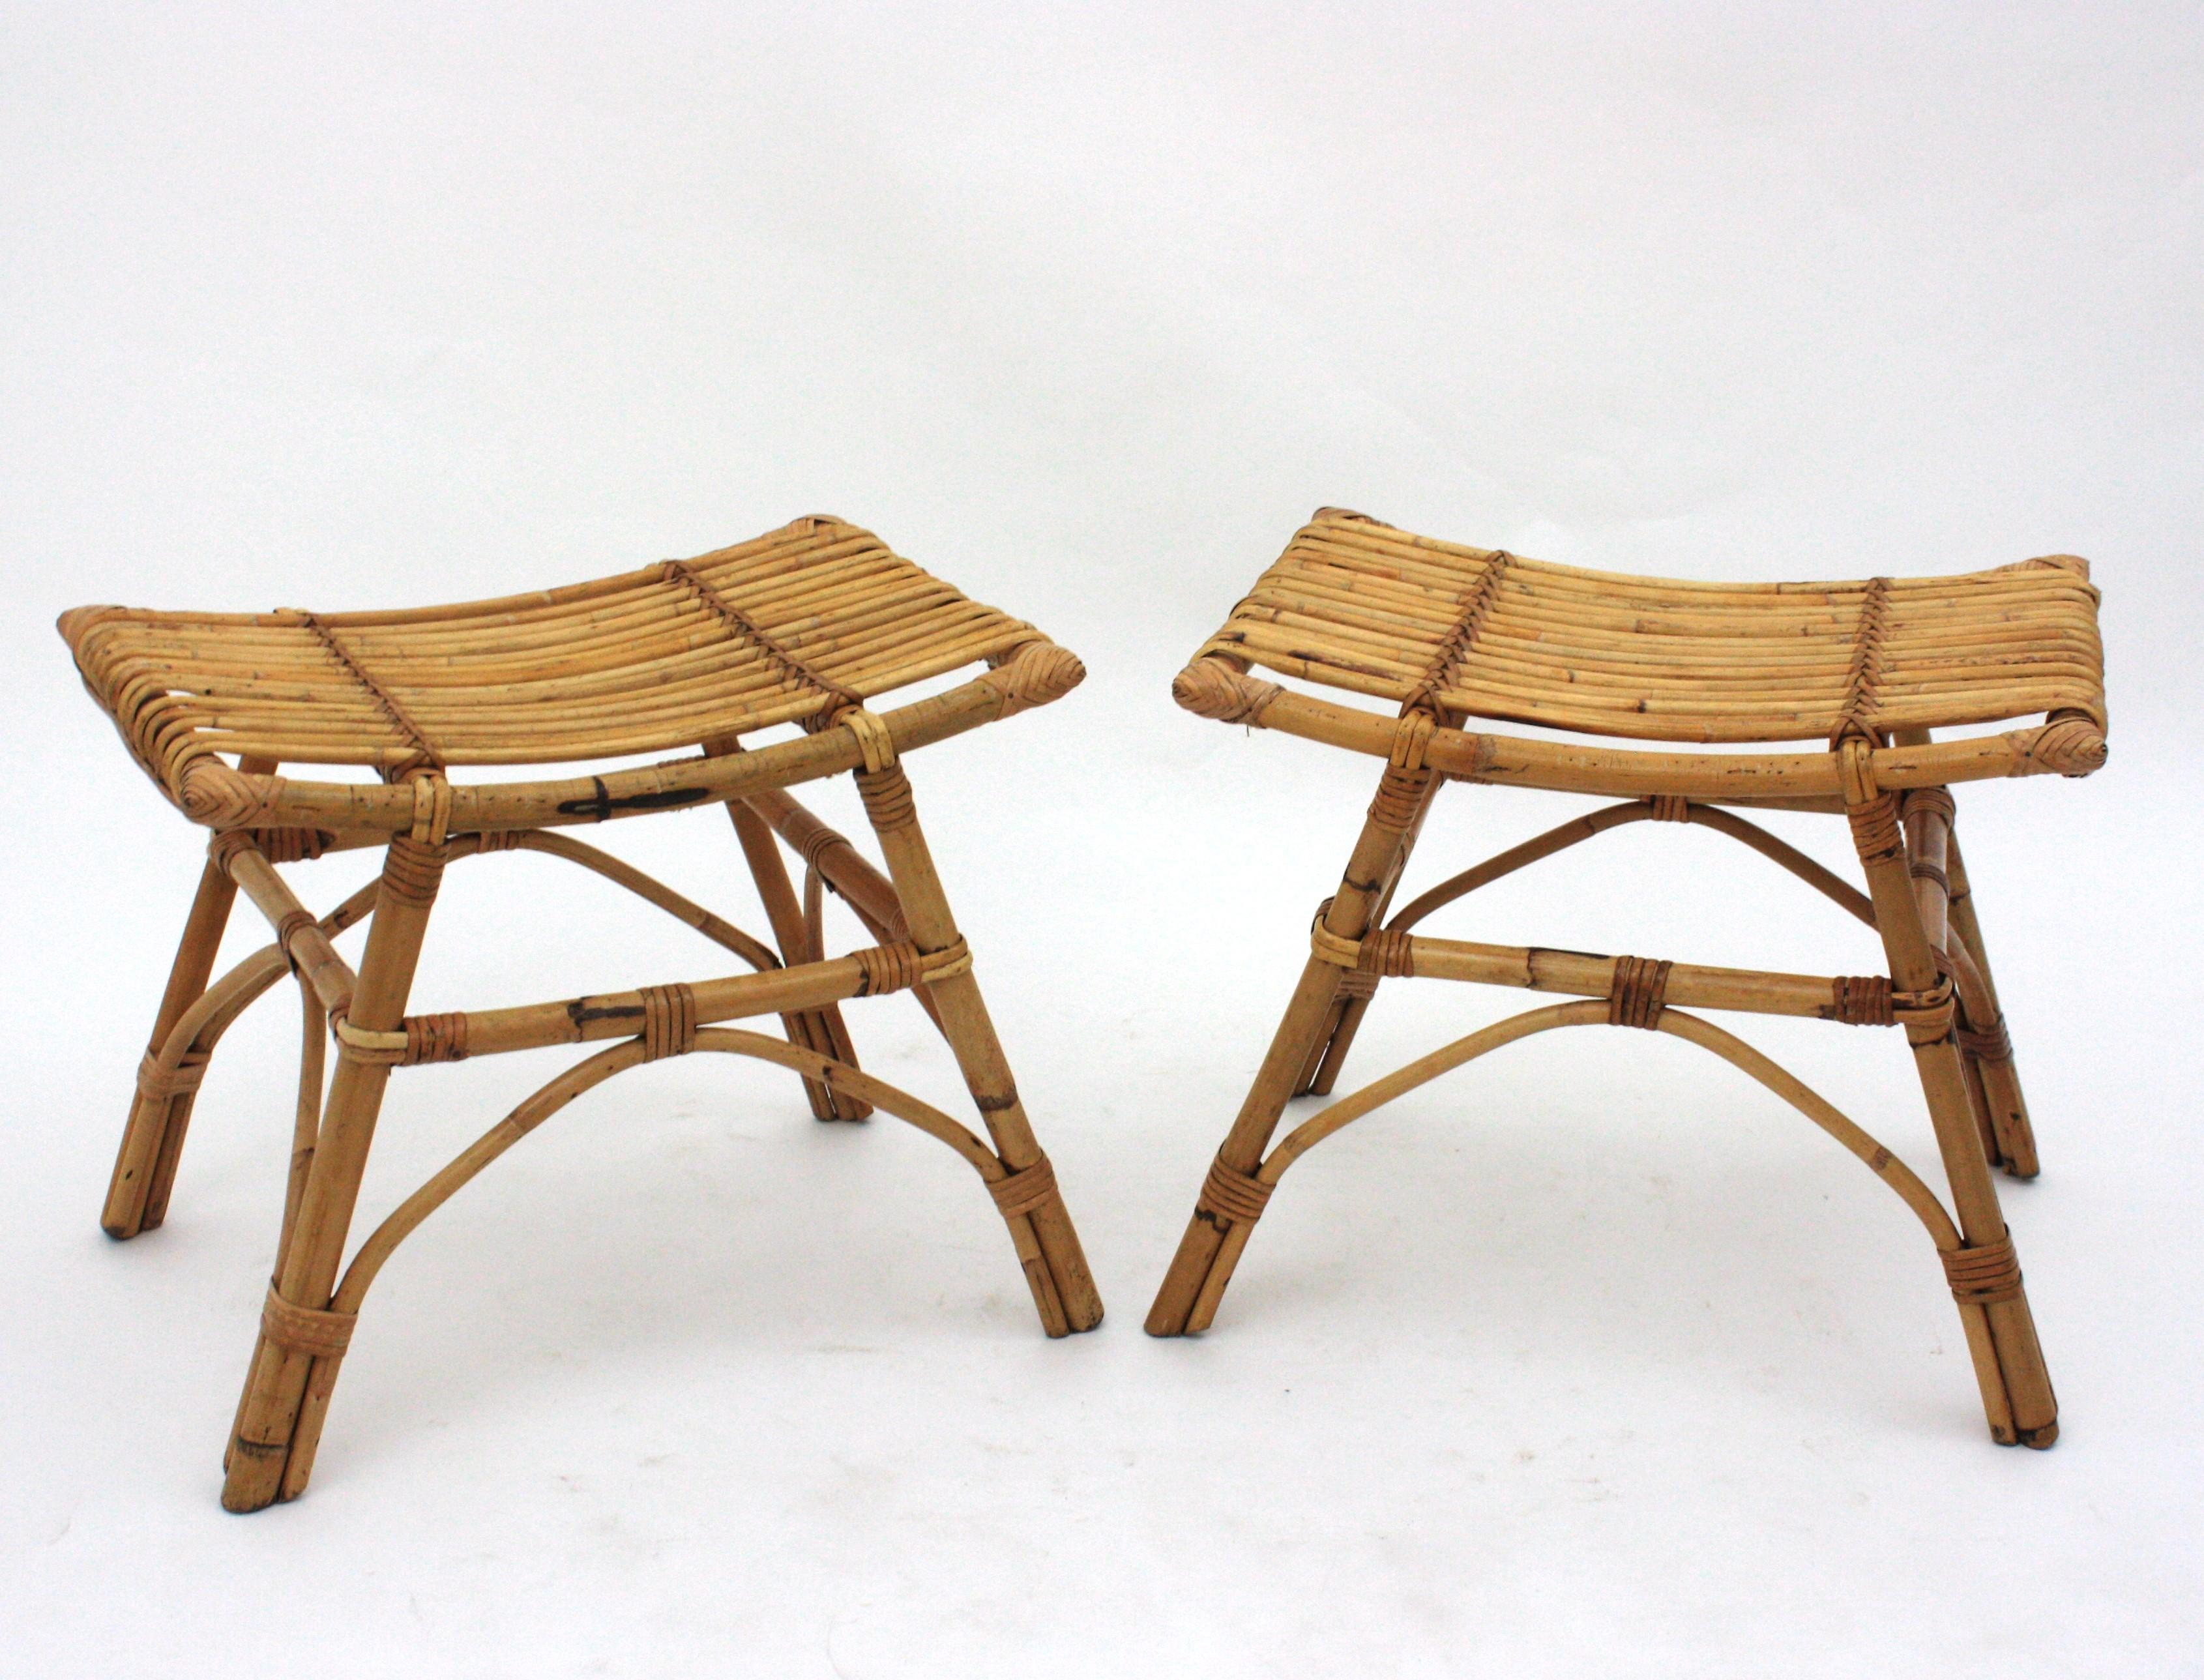 Pair of Bamboo Rattan Stools or Side Tables, 1960s For Sale 1